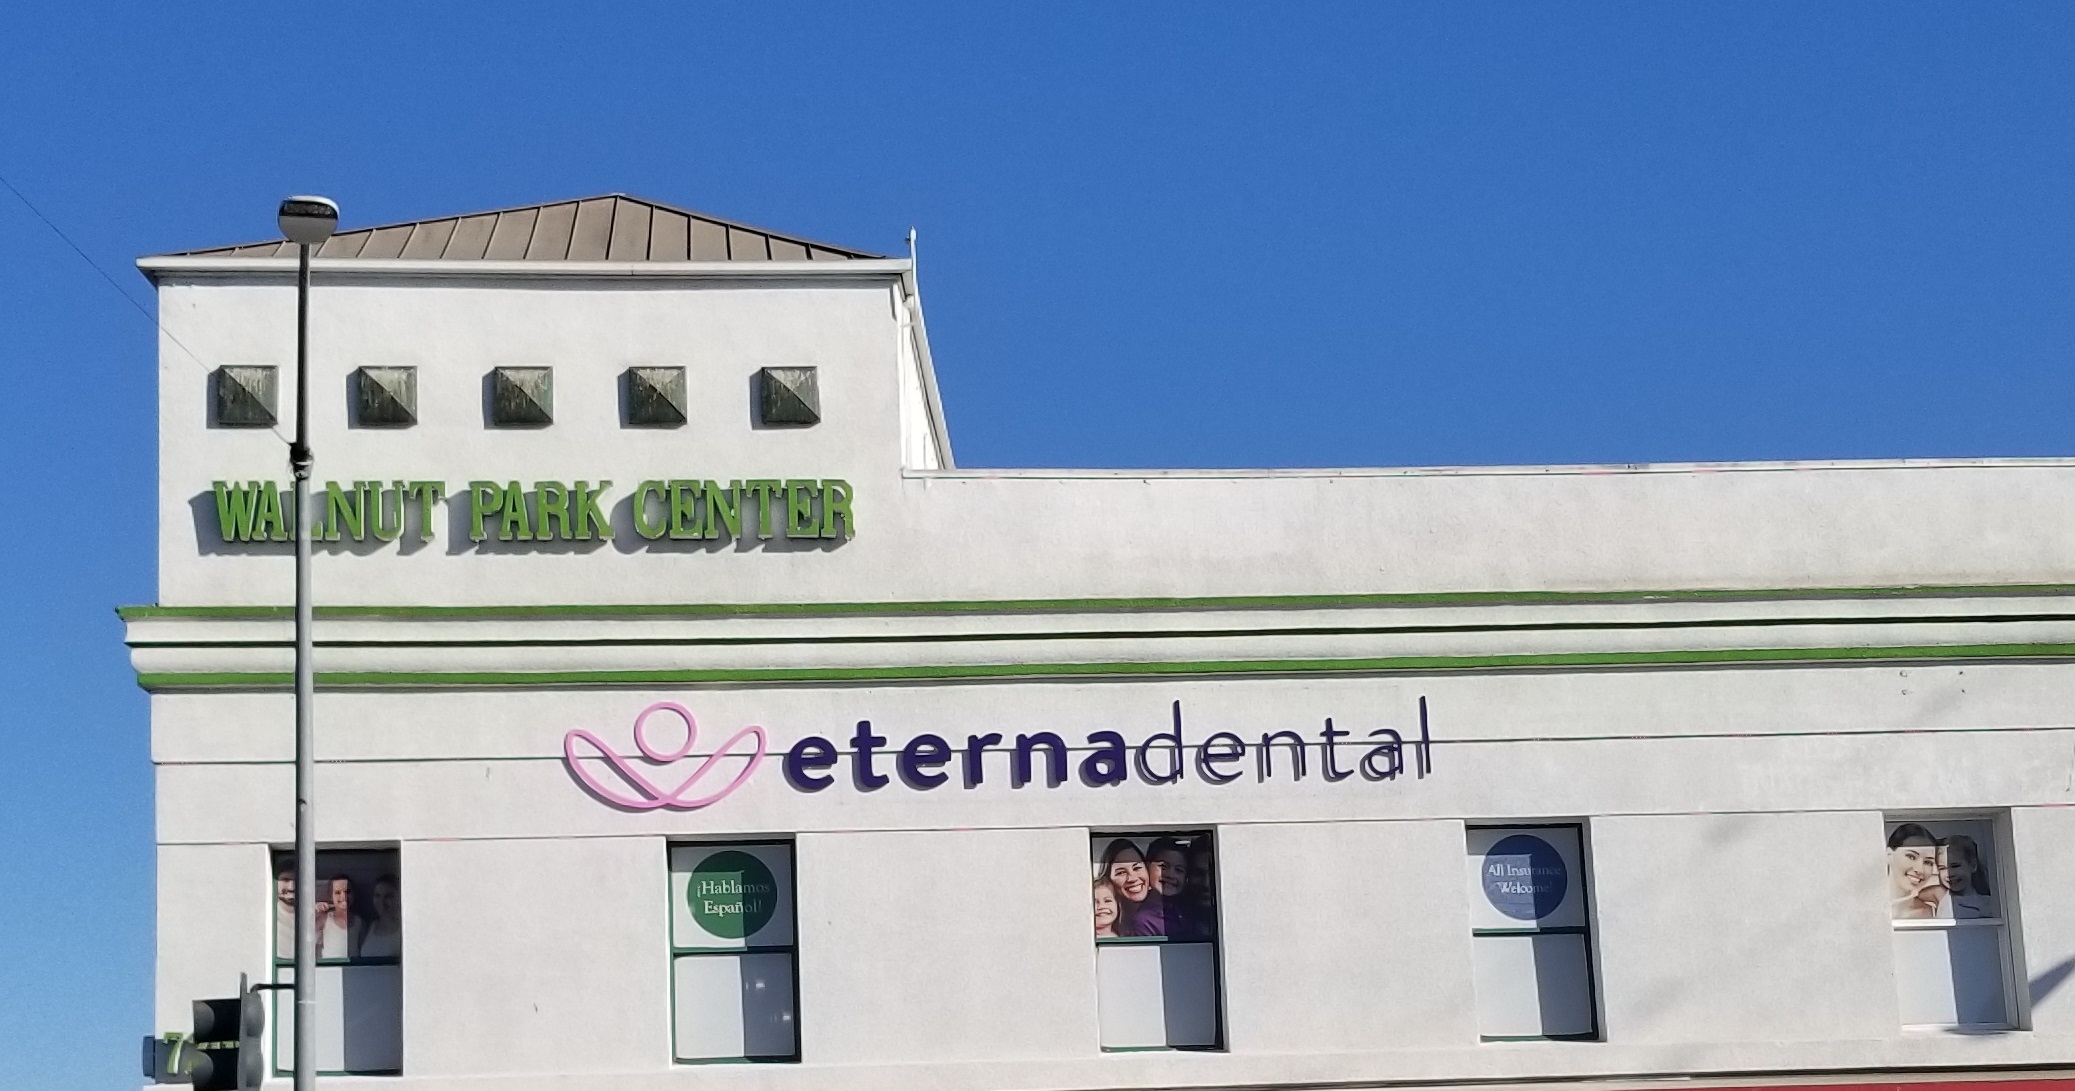 This clinic dimensional lettering is a real attention-grabbing sign for Eternadental as part of their business sign package.